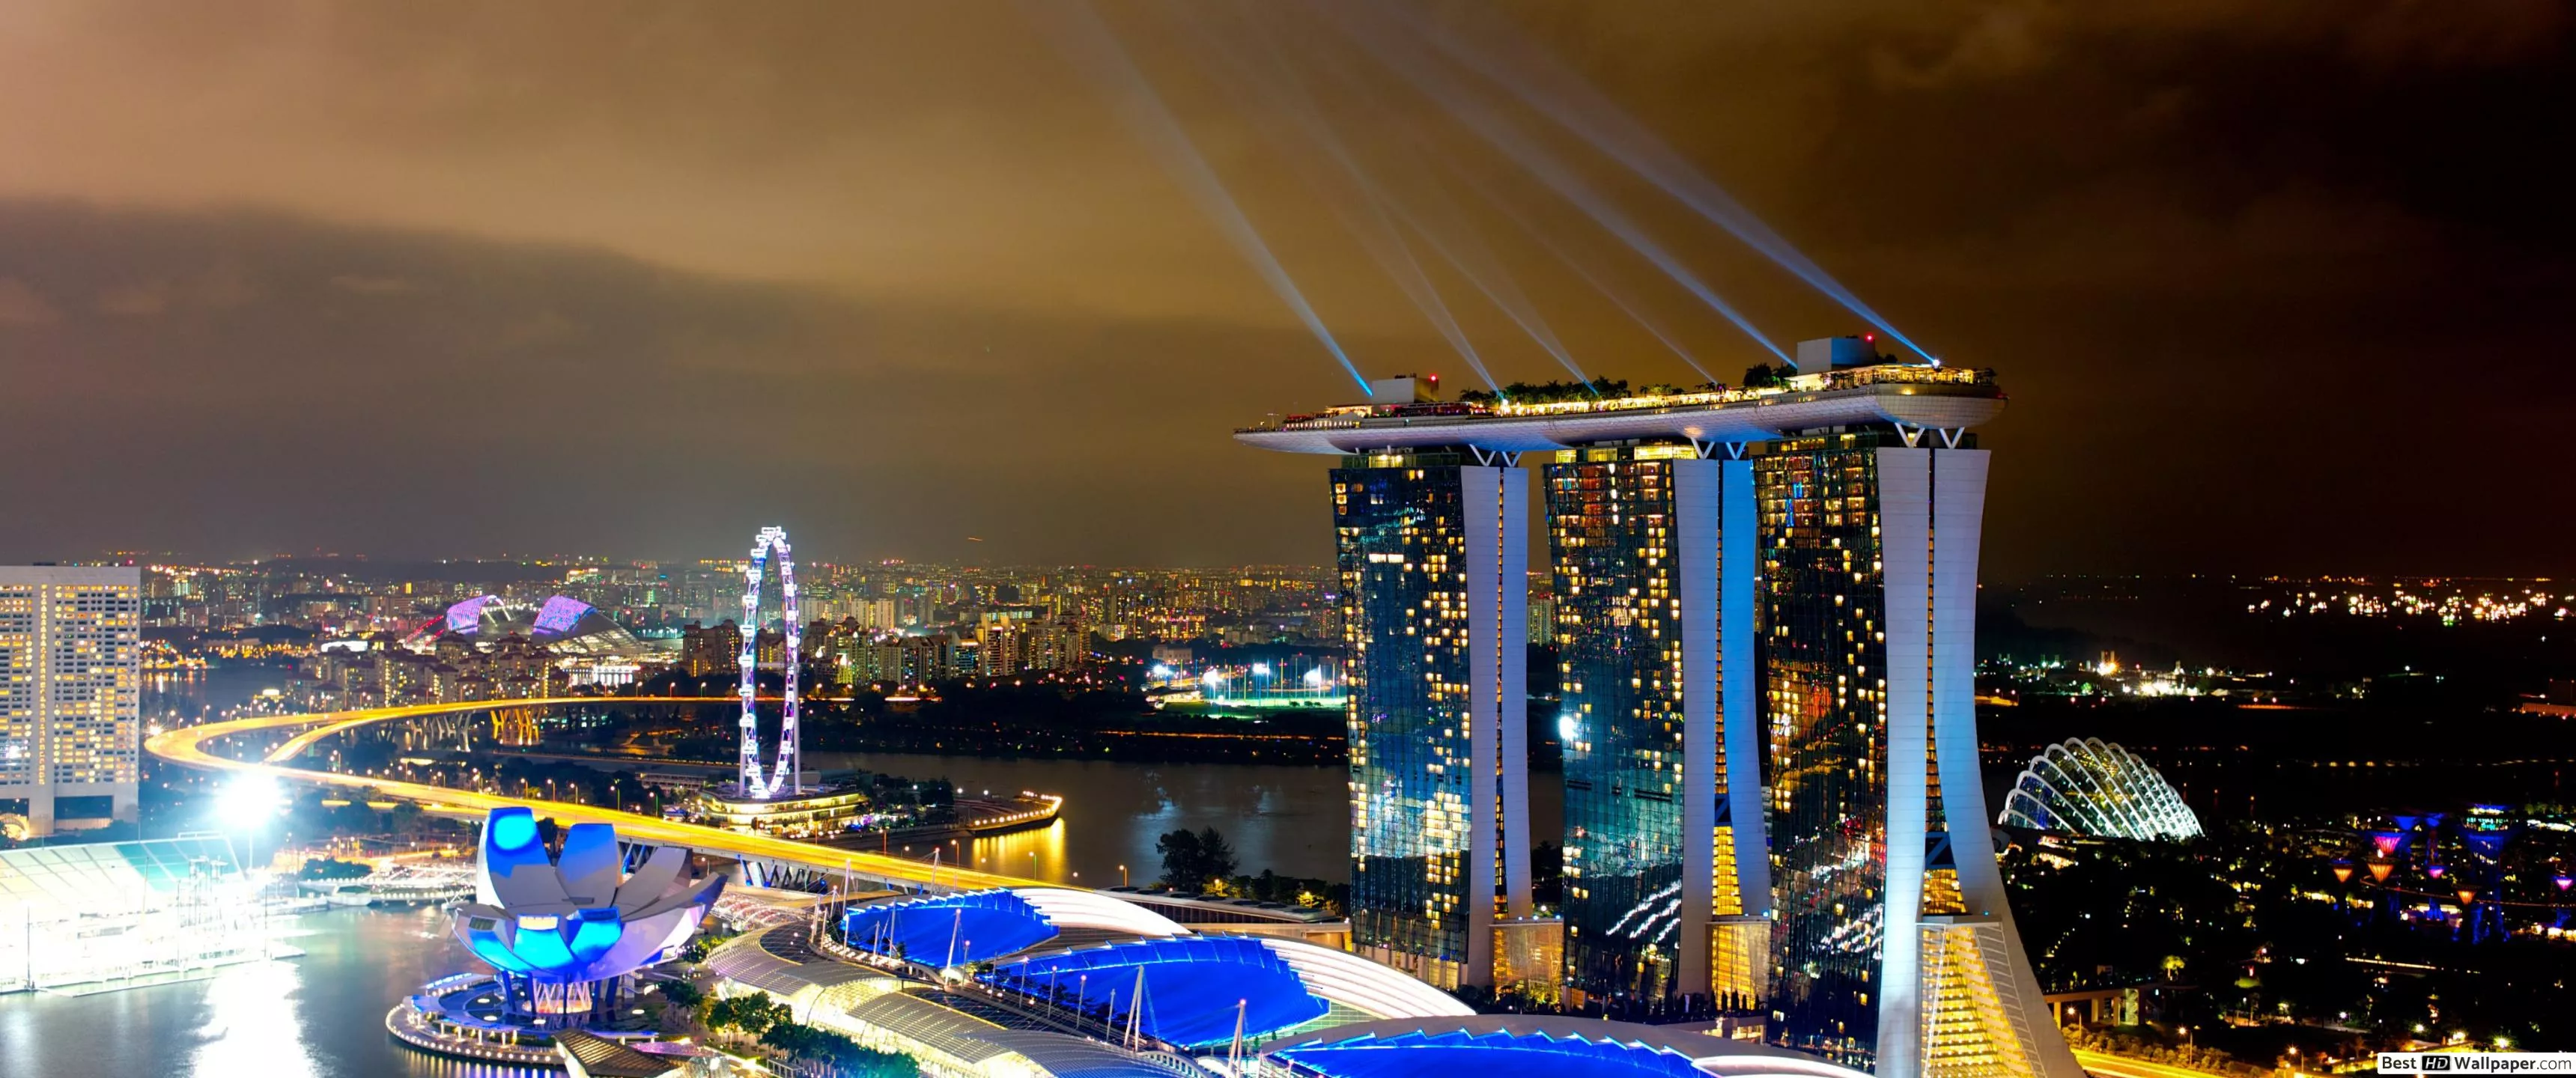 Hotel Marina Bay in Singapore, Central Asia | Architecture,Observation Decks - Rated 3.8